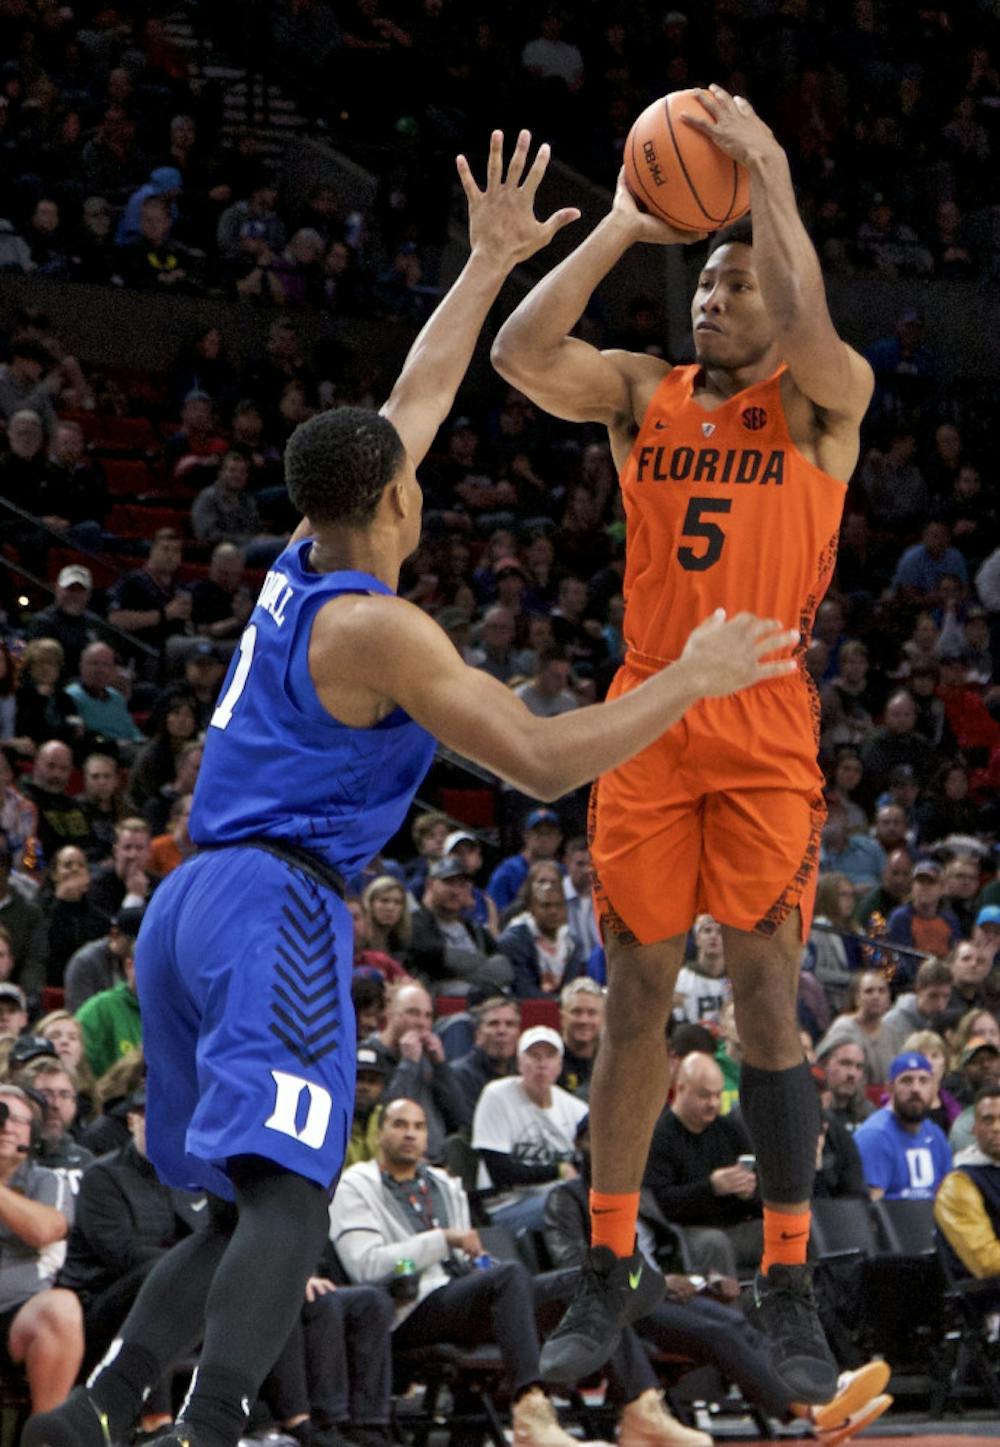 <p>Florida guard KeVaughn Allen, right, shoots over Duke guard Trevon Duval during the first half of an NCAA college basketball game in the Phil Knight Invitational tournament in Portland, Ore., Sunday, Nov. 26, 2017. (AP Photo/Craig Mitchelldyer)</p>